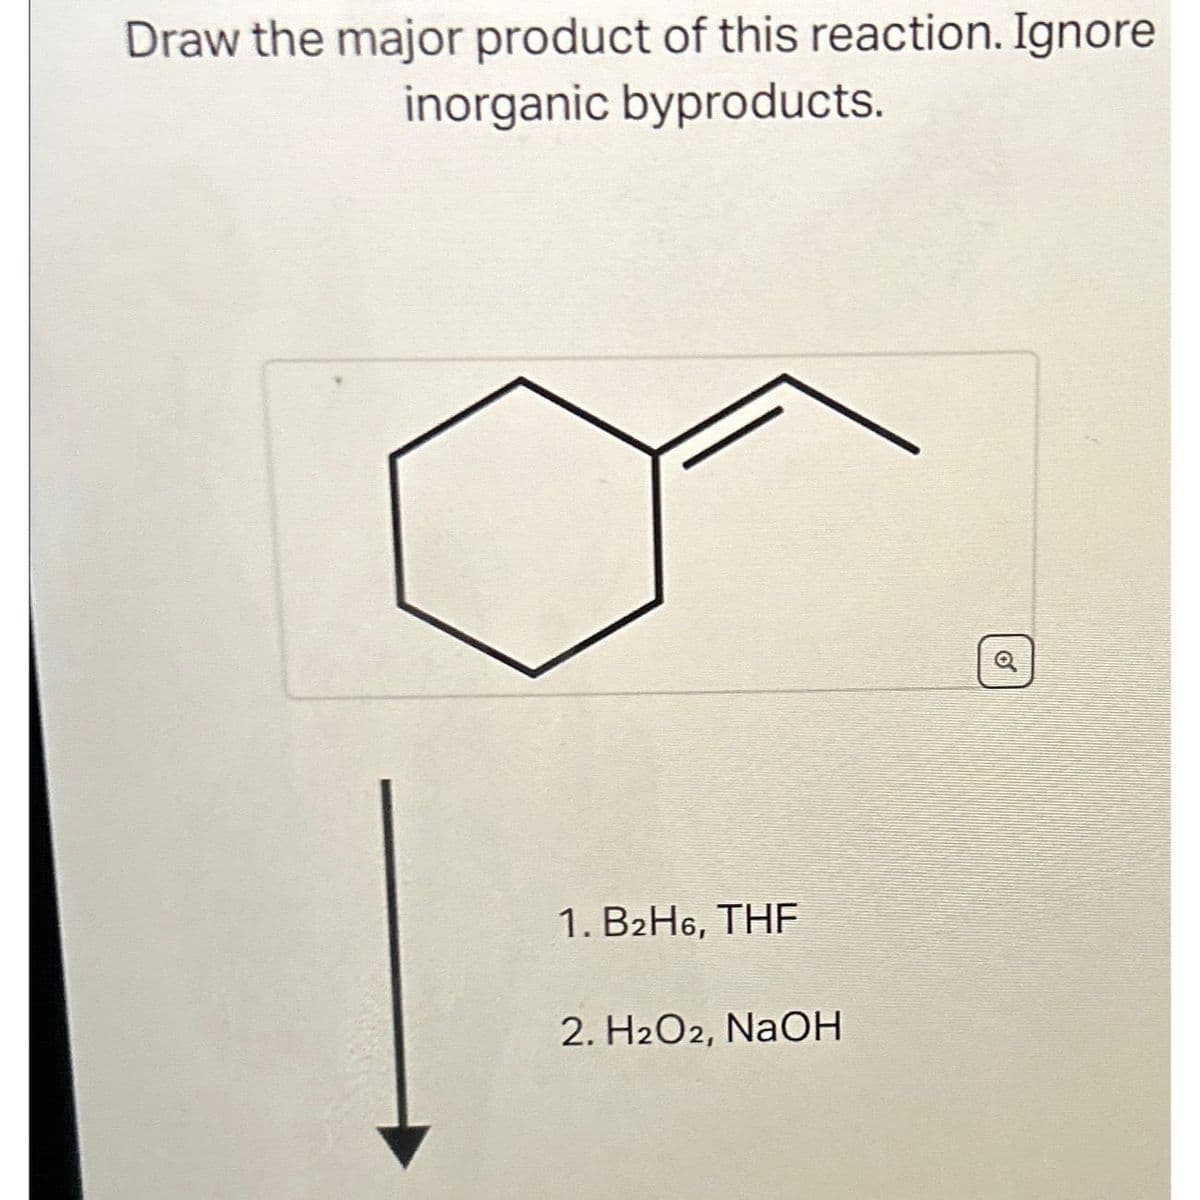 Draw the major product of this reaction. Ignore
inorganic byproducts.
1. B2H6, THF
2. H2O2, NaOH
Q